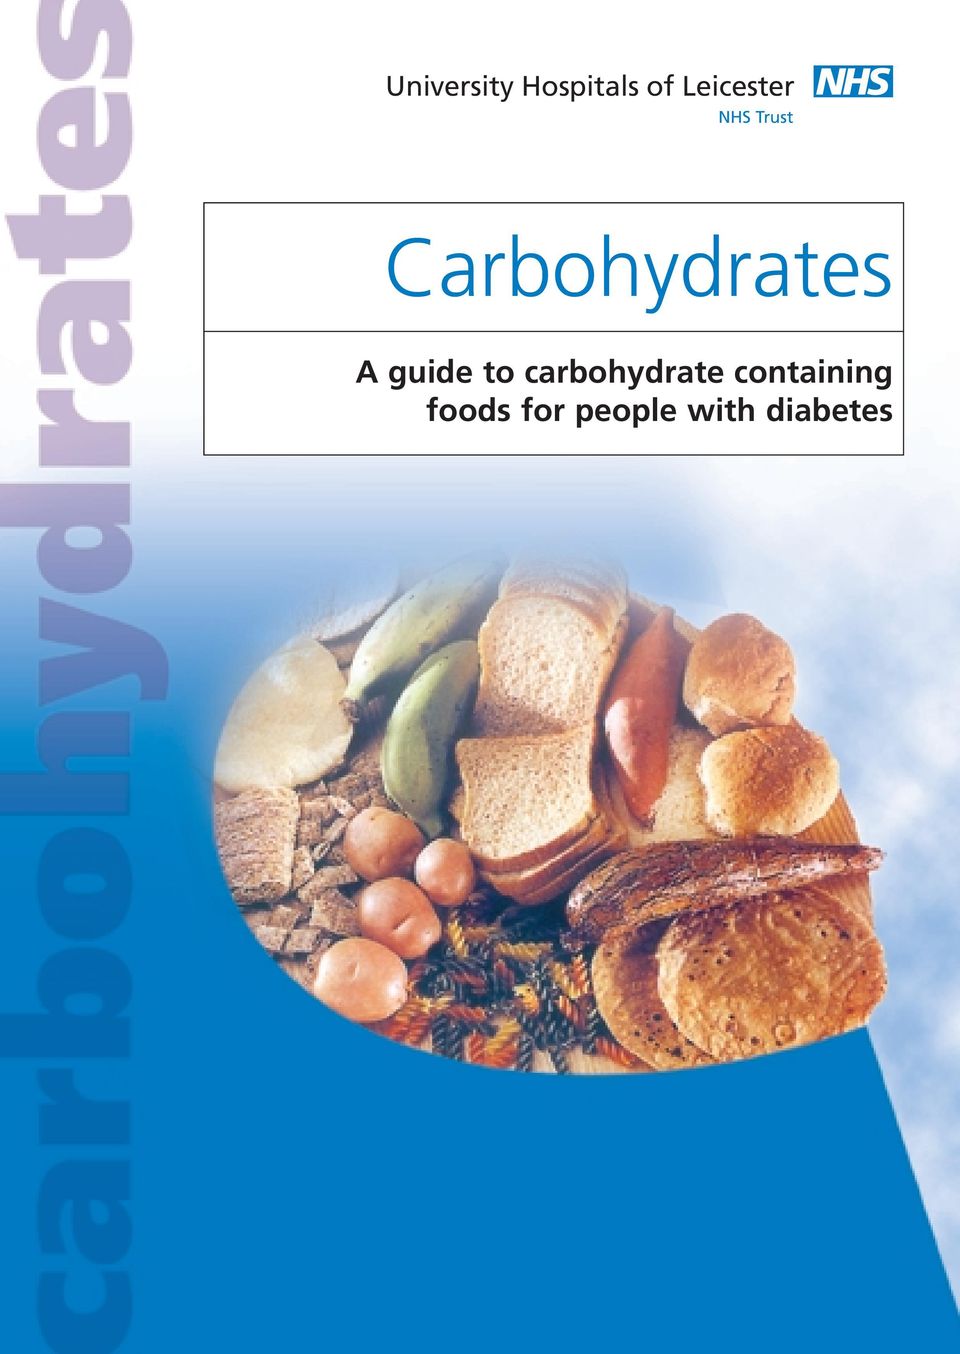 Carbohydrates A guide to